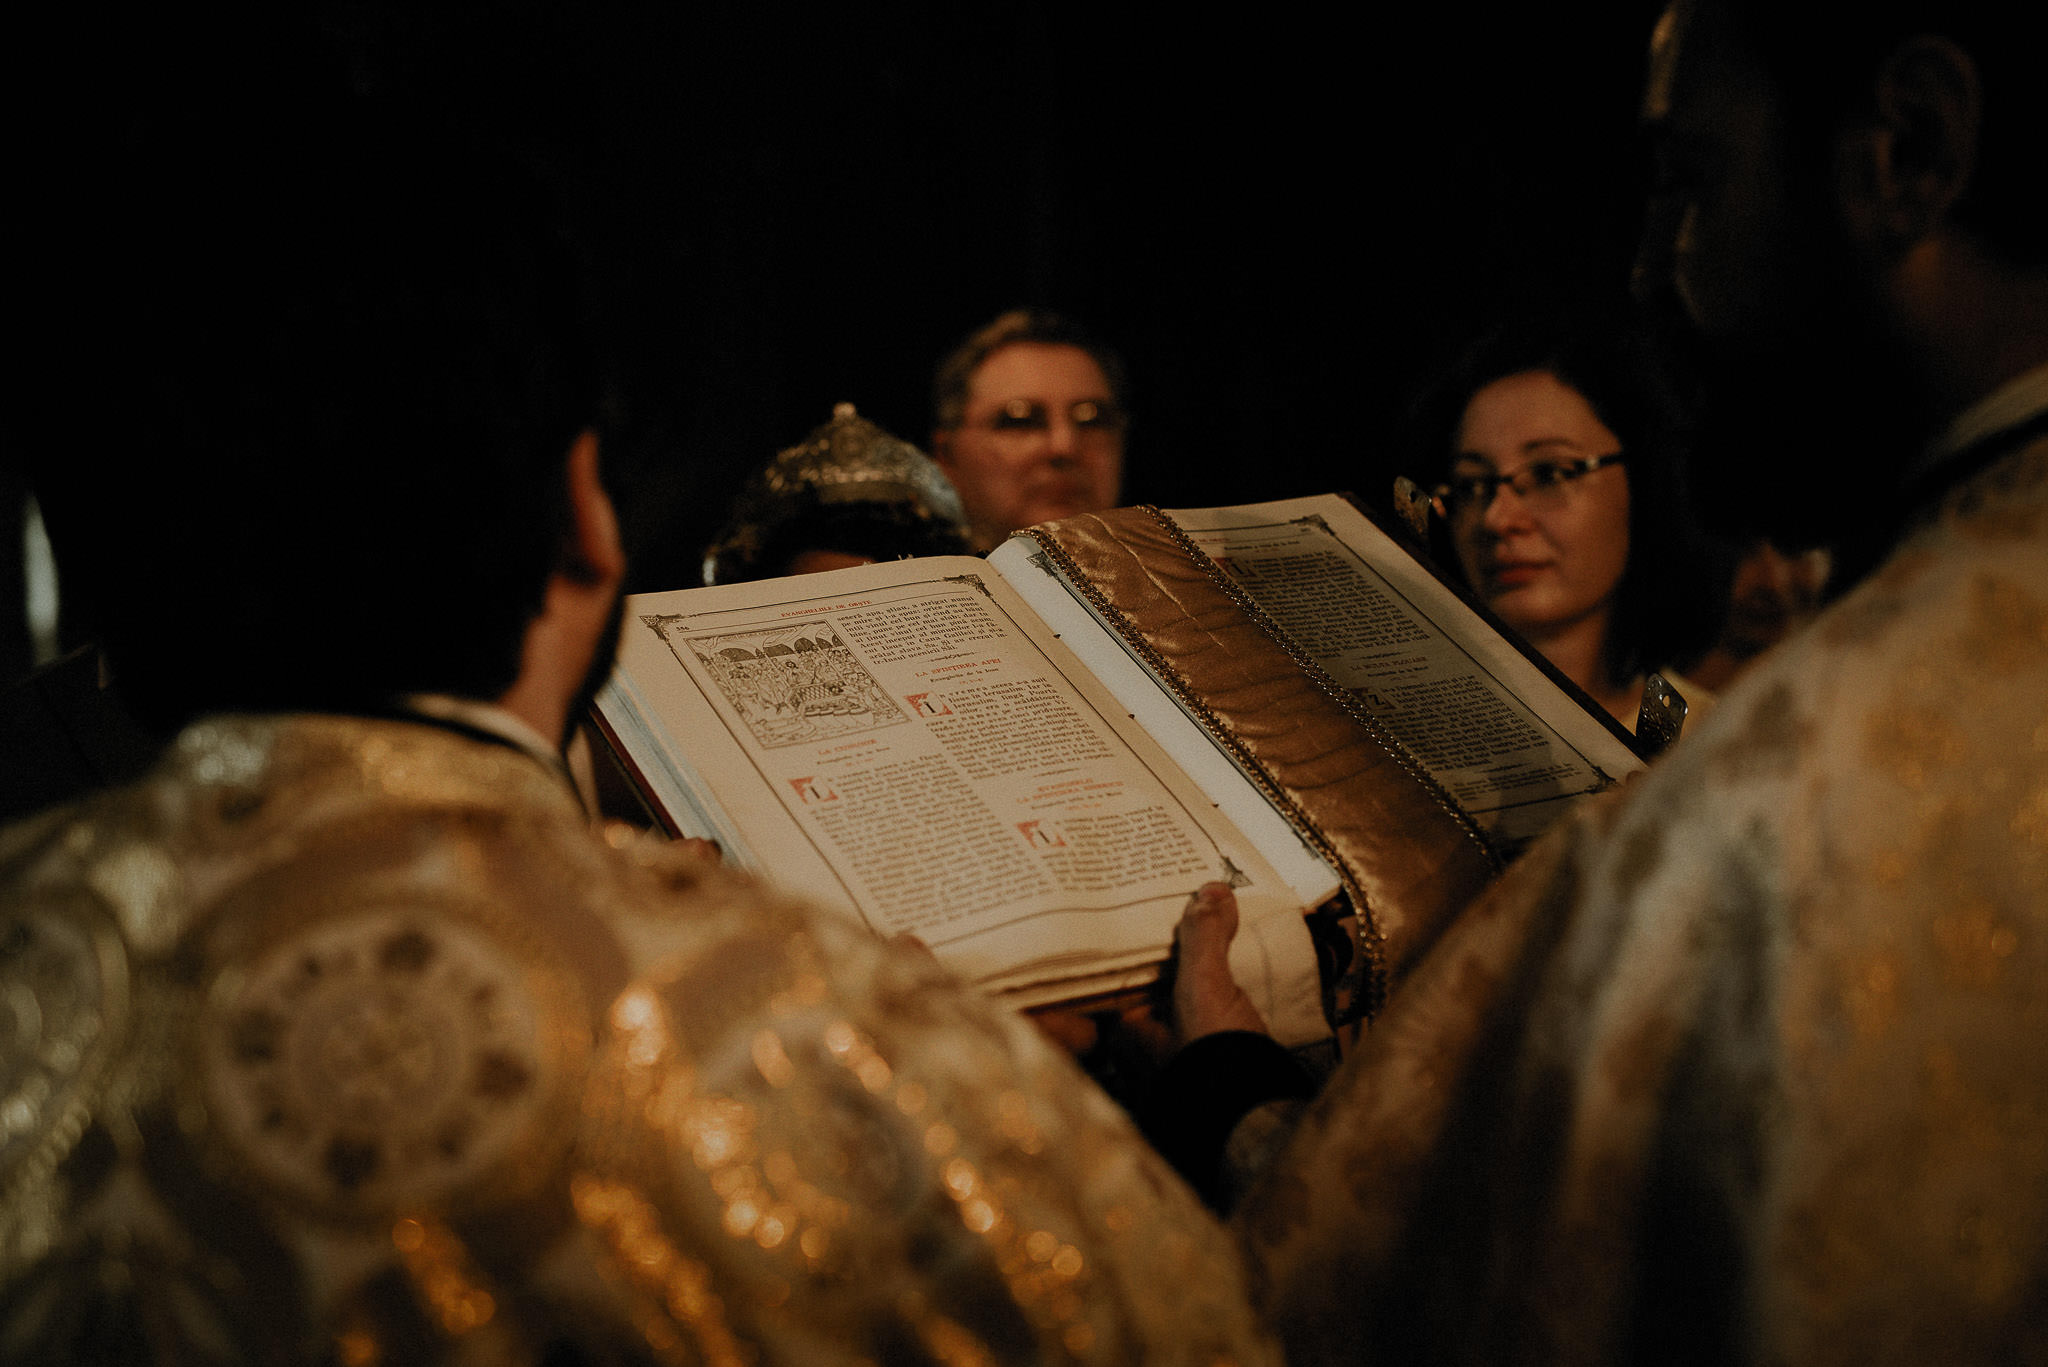 priests reading the bible during the religious ceremony